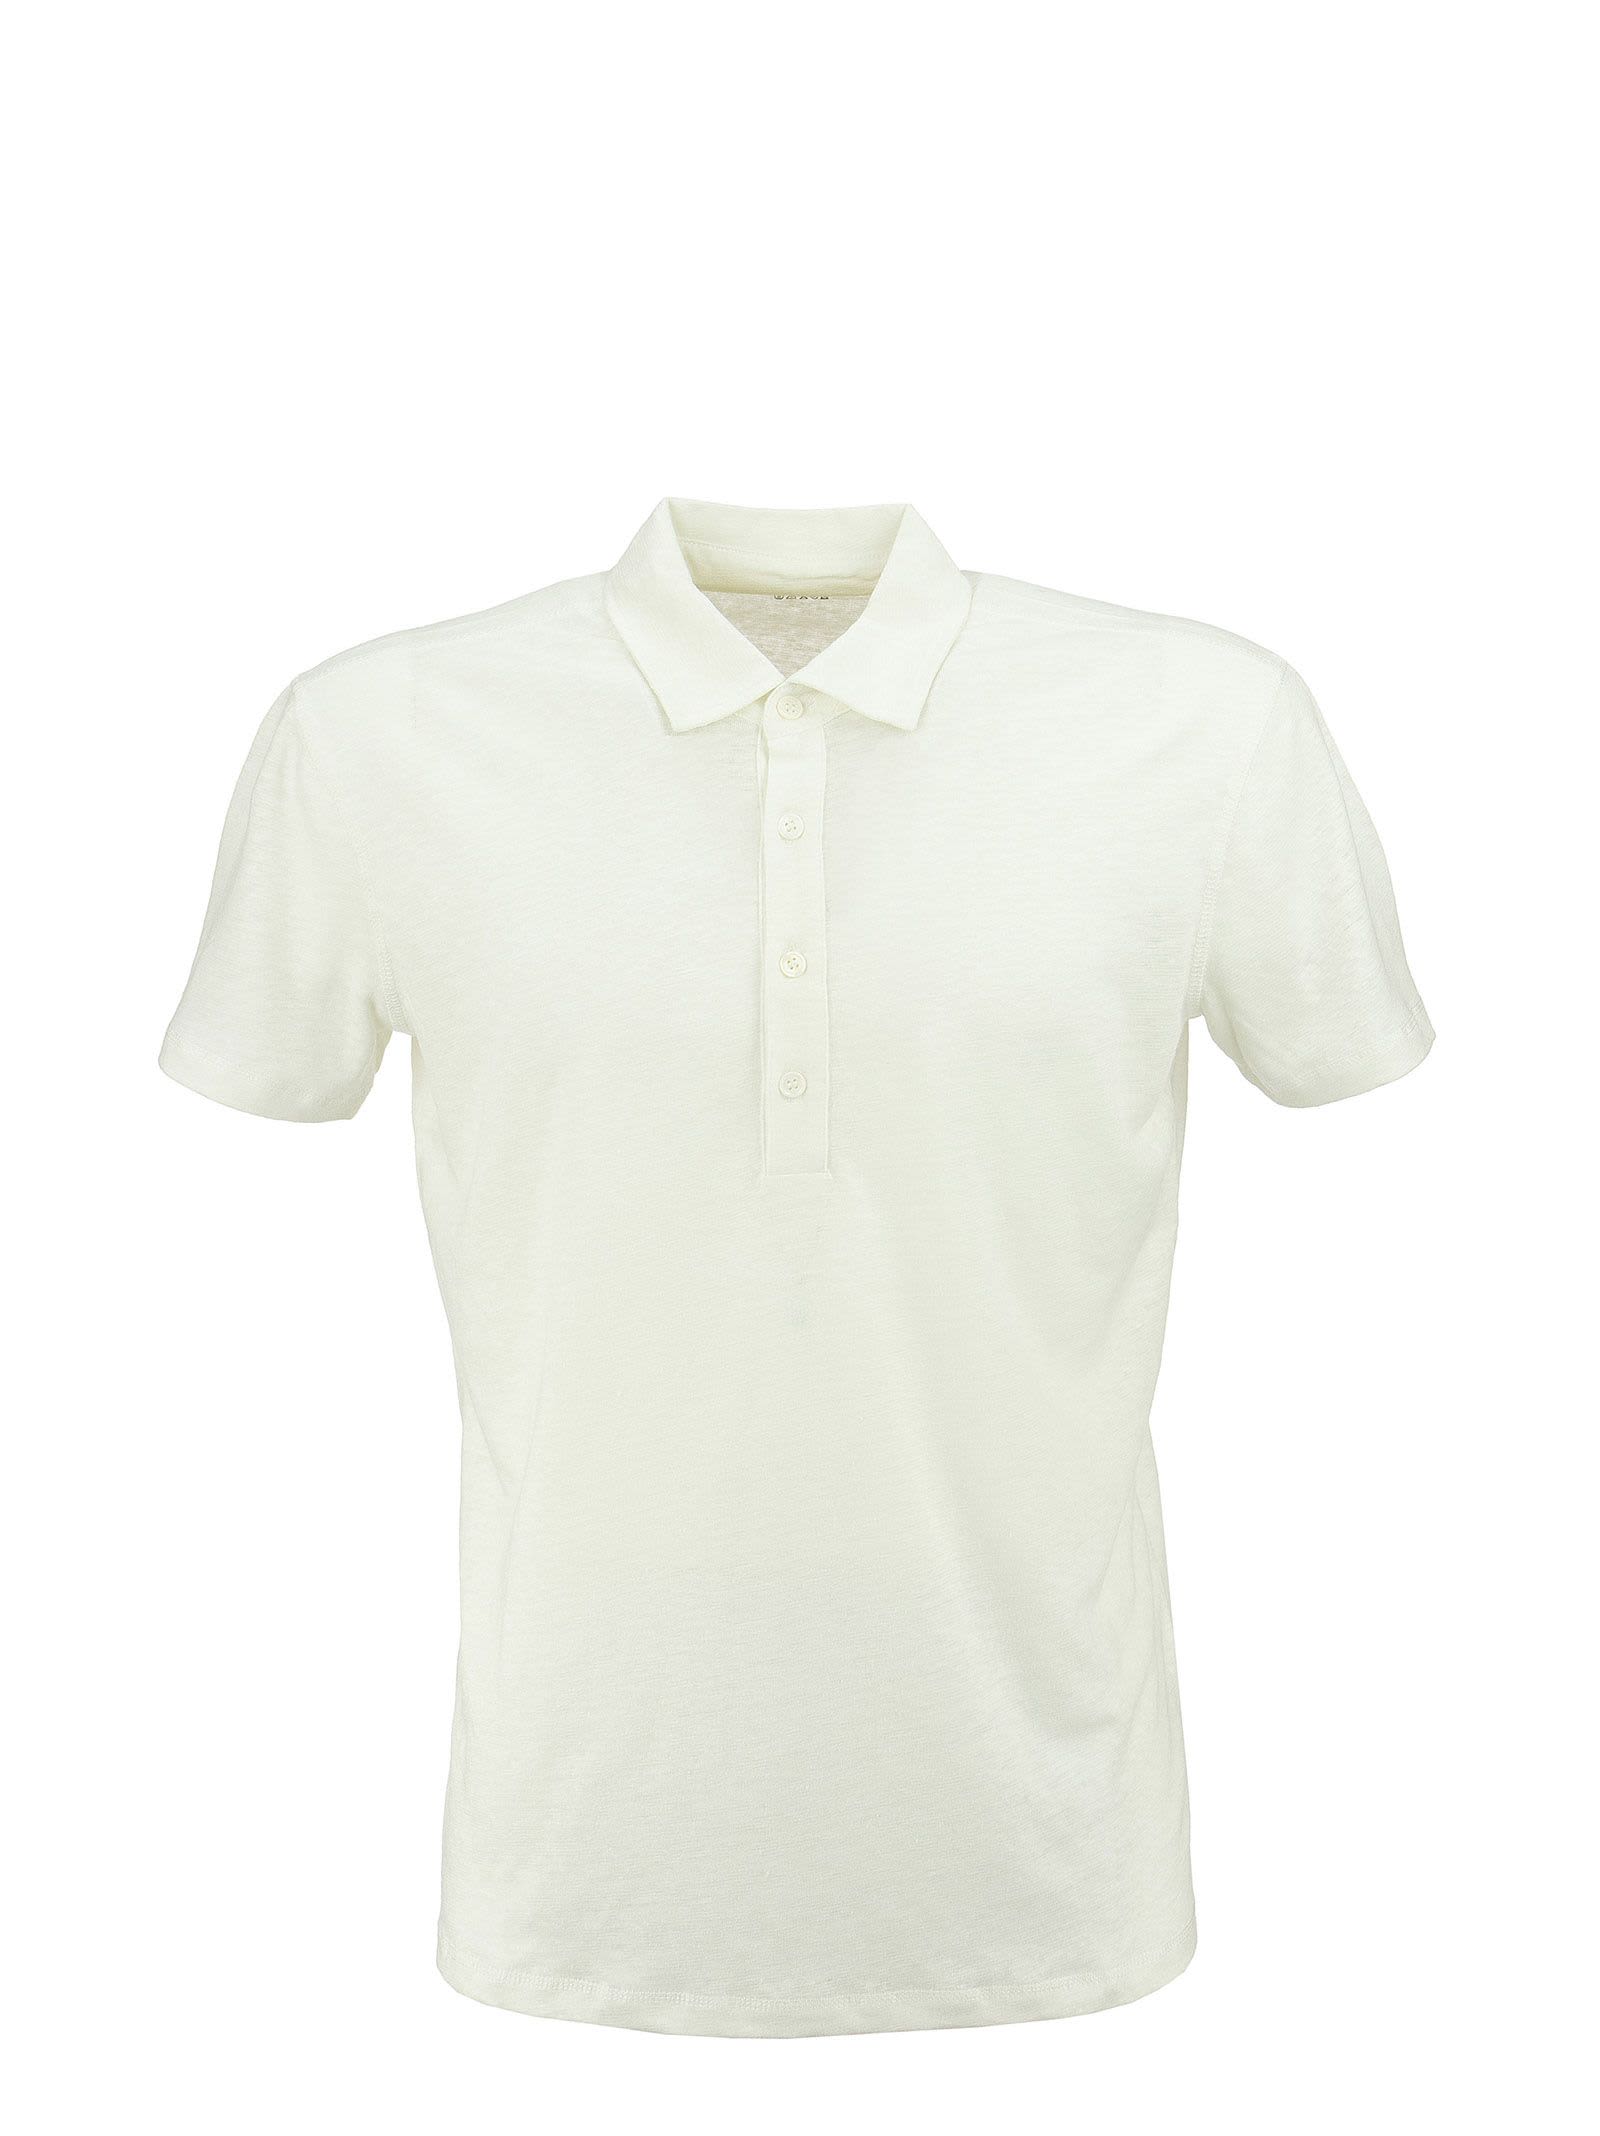 MAJESTIC LINEN POLO SHIRT WITH SHORT SLEEVES,M011 HPO009 001